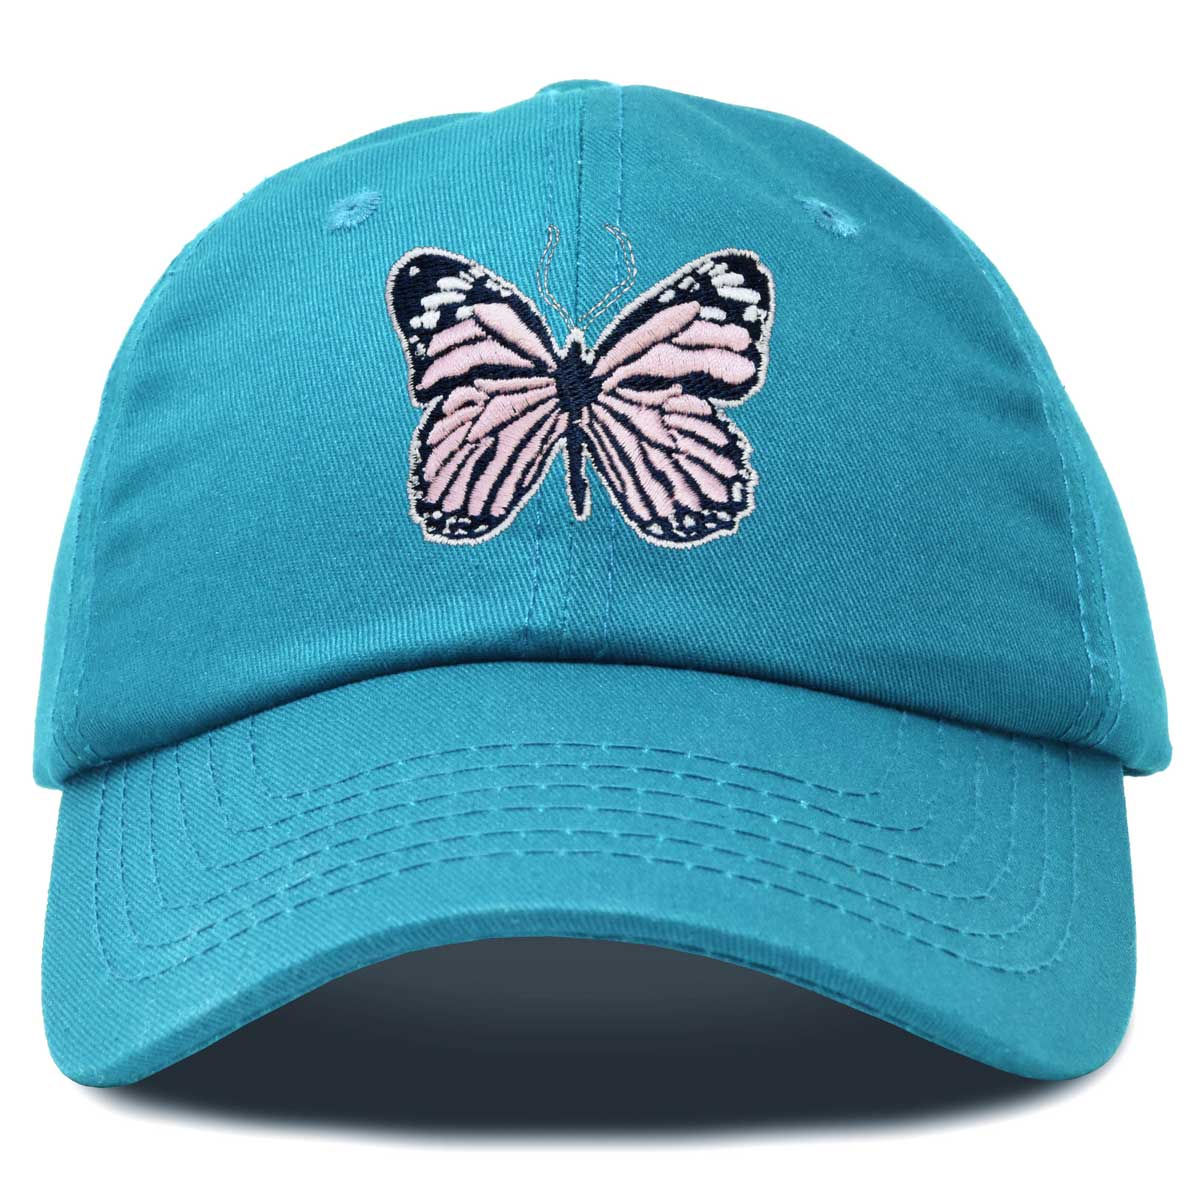 Dalix Pink Butterfly Hat